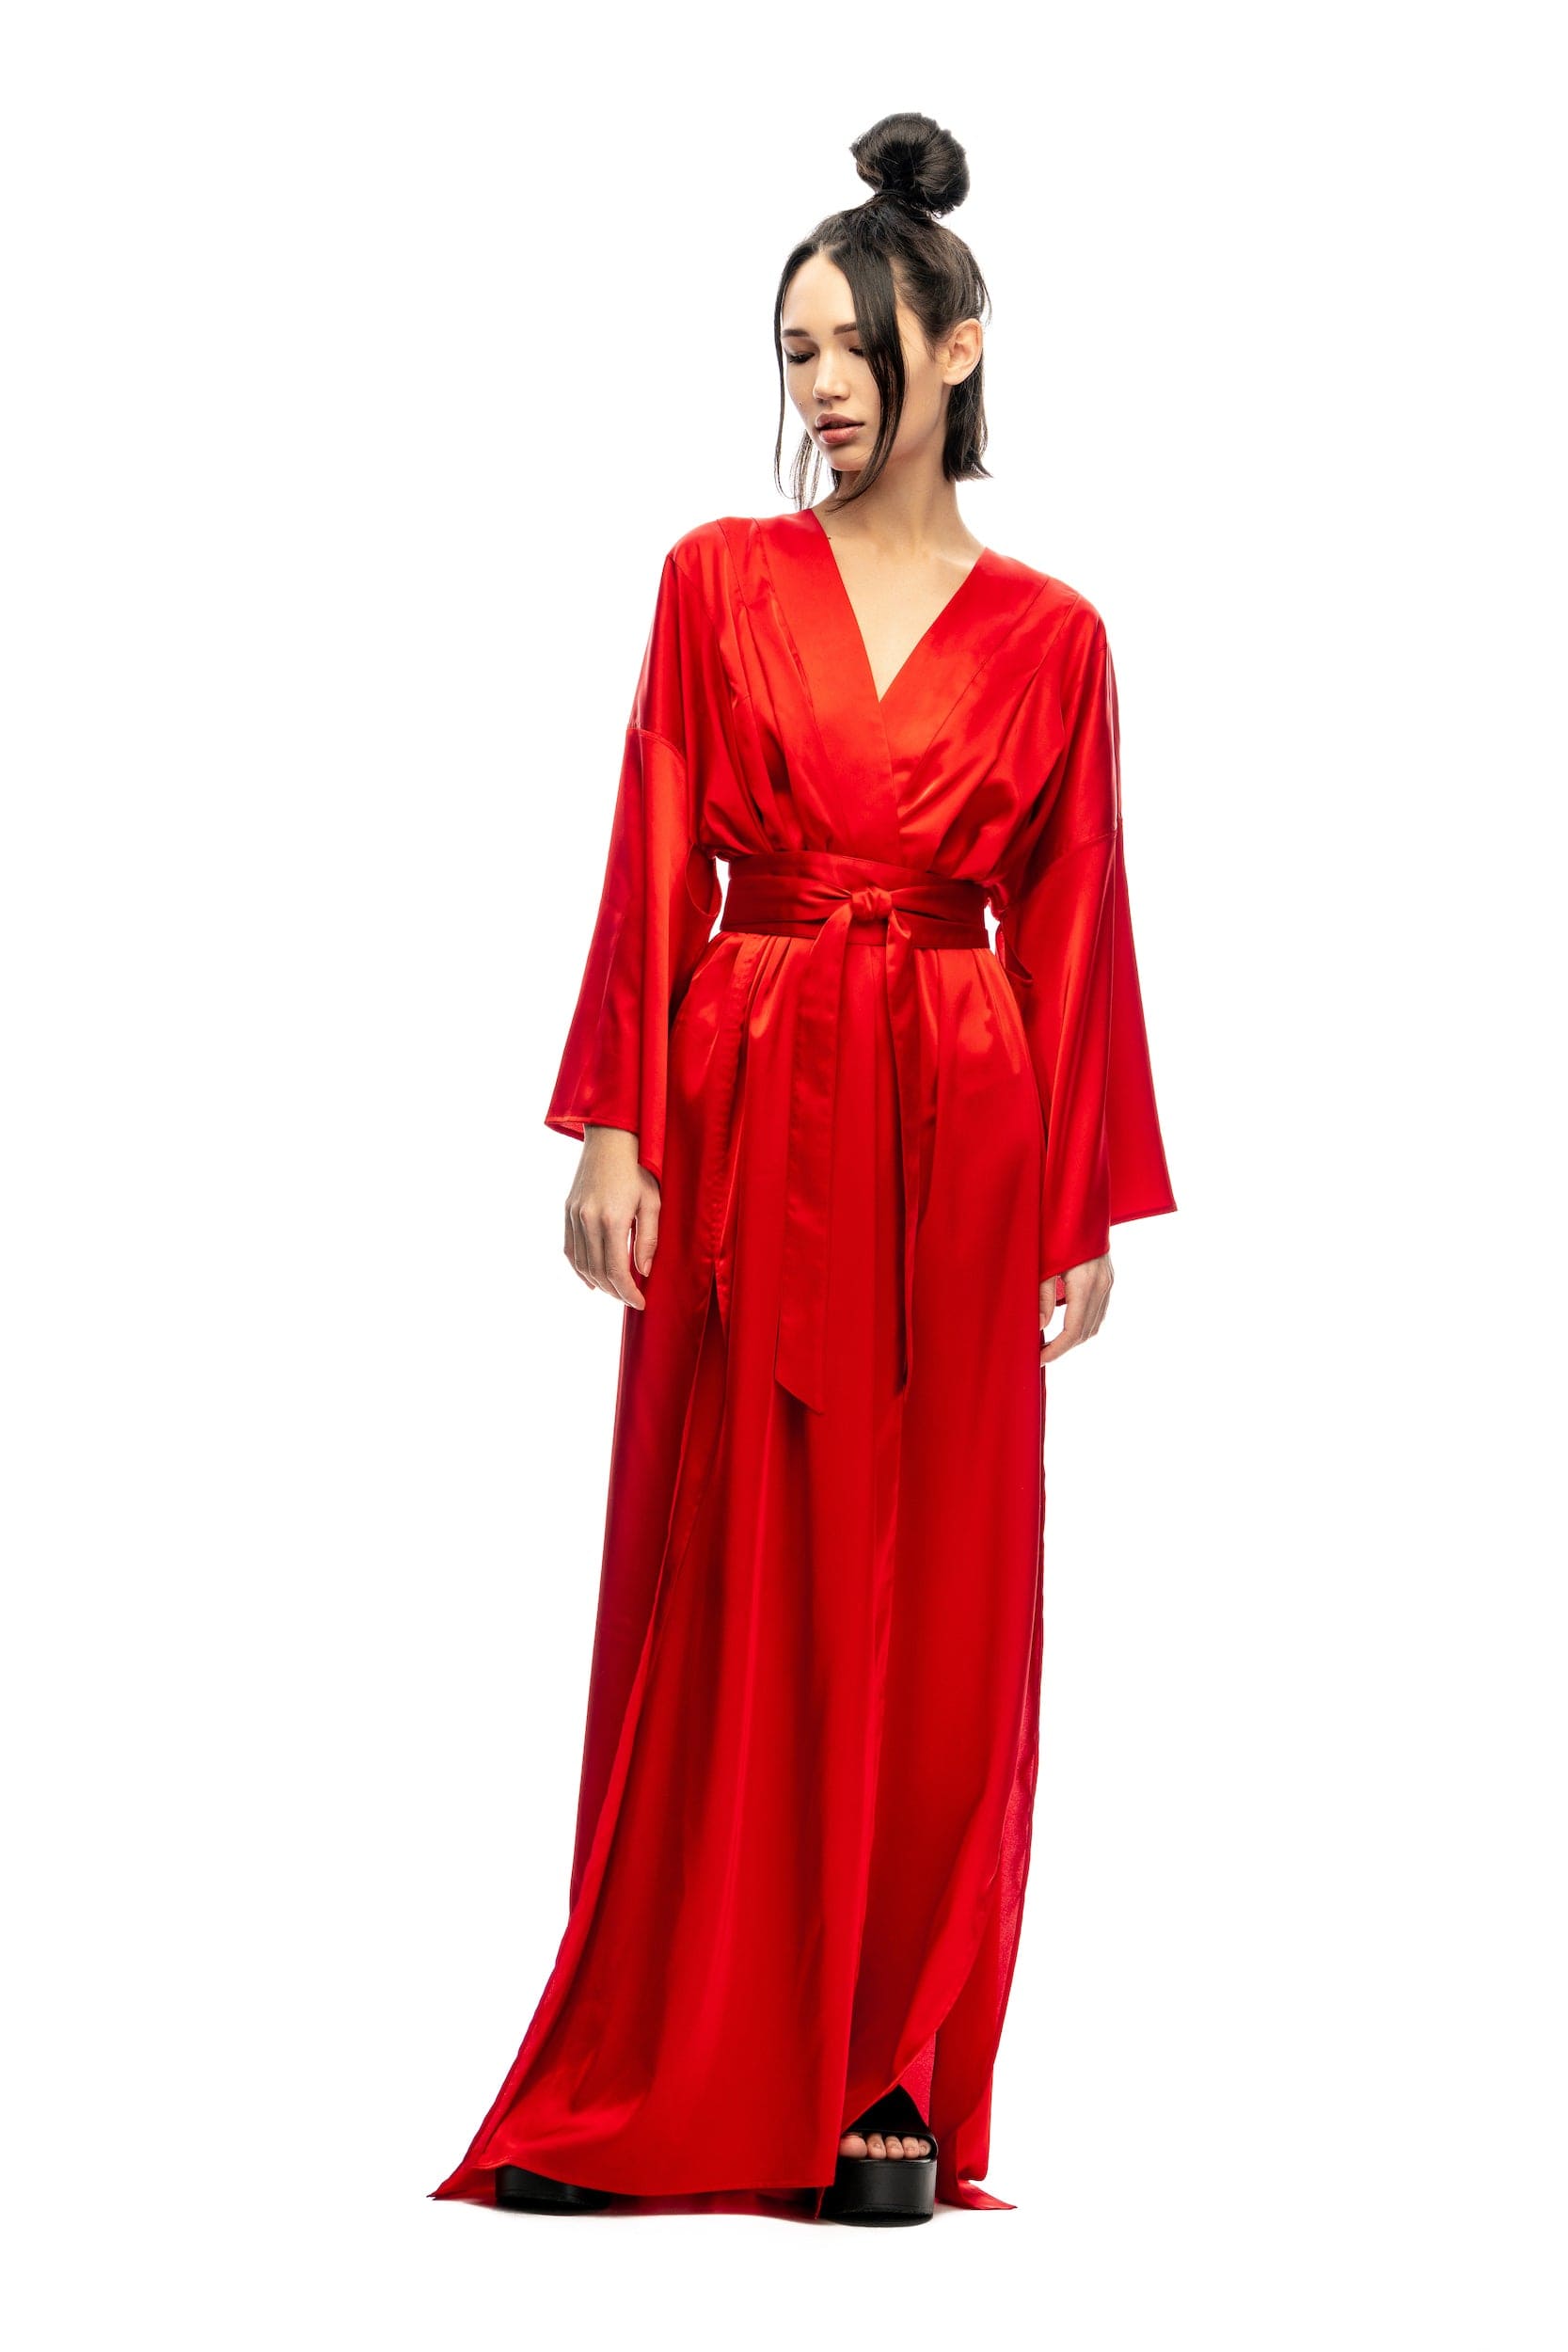 MDNT45 One size / Red Fiery dress